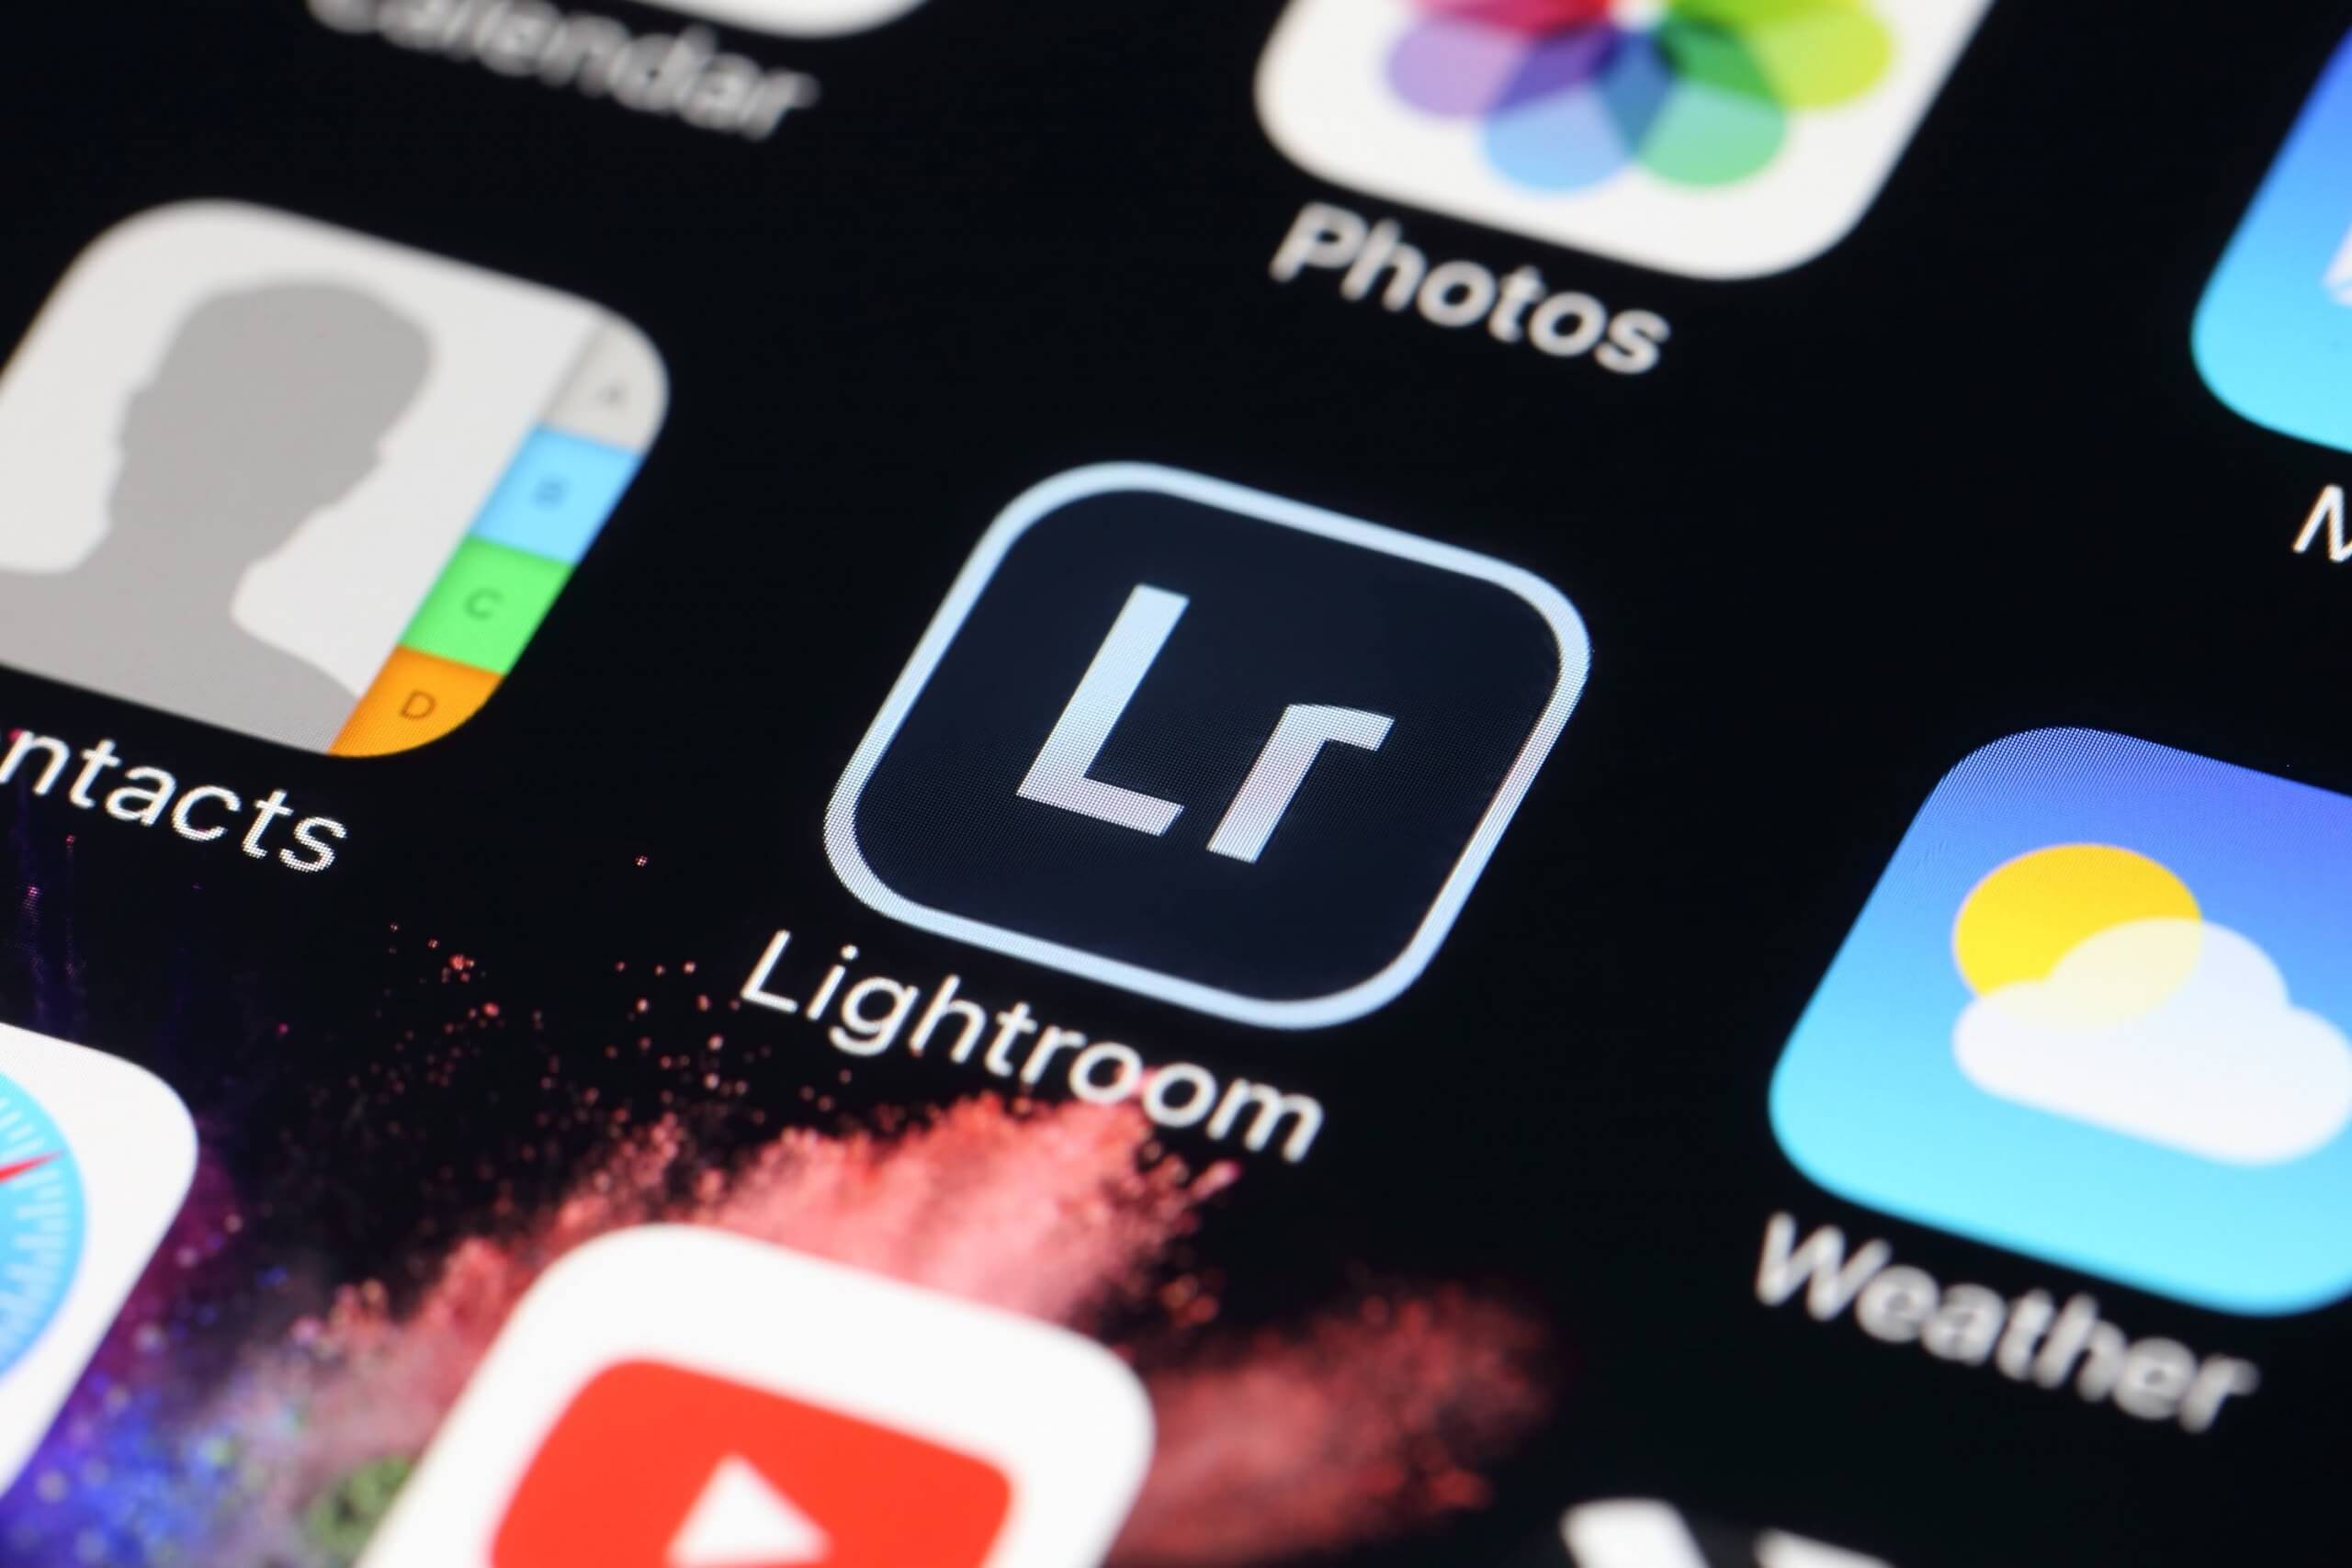 Latest Lightroom update for iOS wiped all unsynced pictures and presets